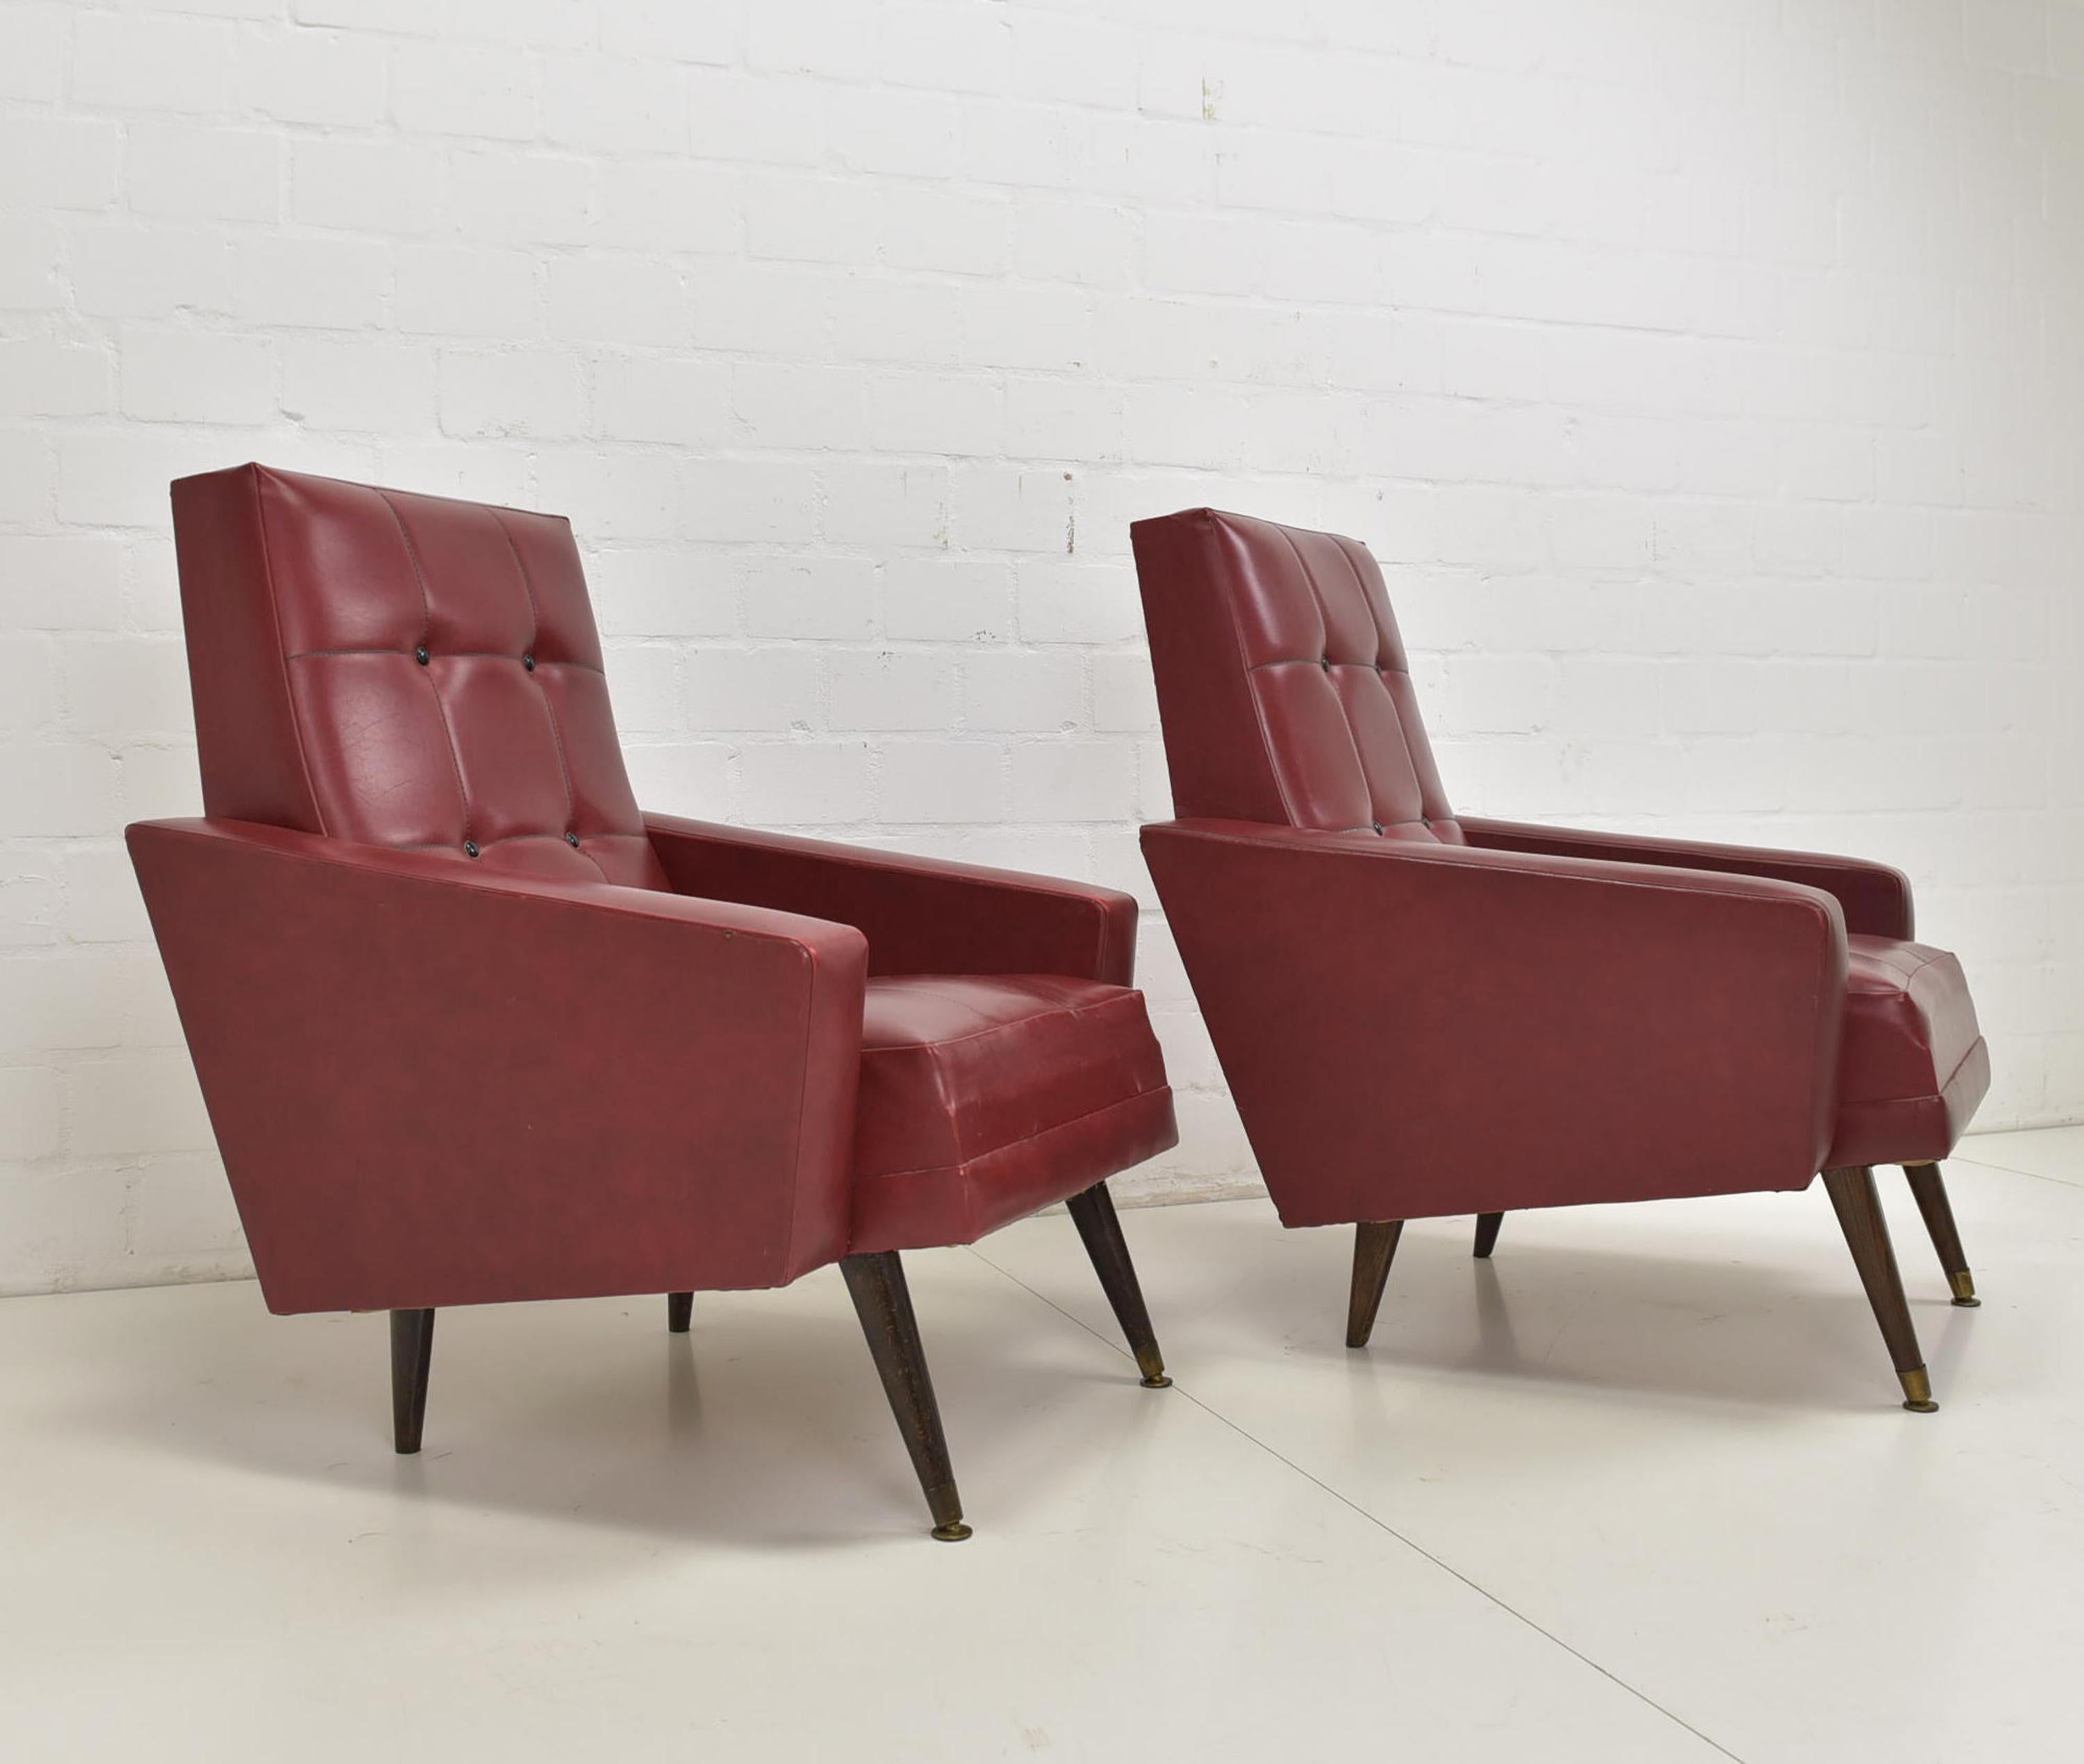 Leather Pair of Vintage Armchairs 2x Lounge Chair / Red Skai Rockabilly Chairs, 50s 60s For Sale